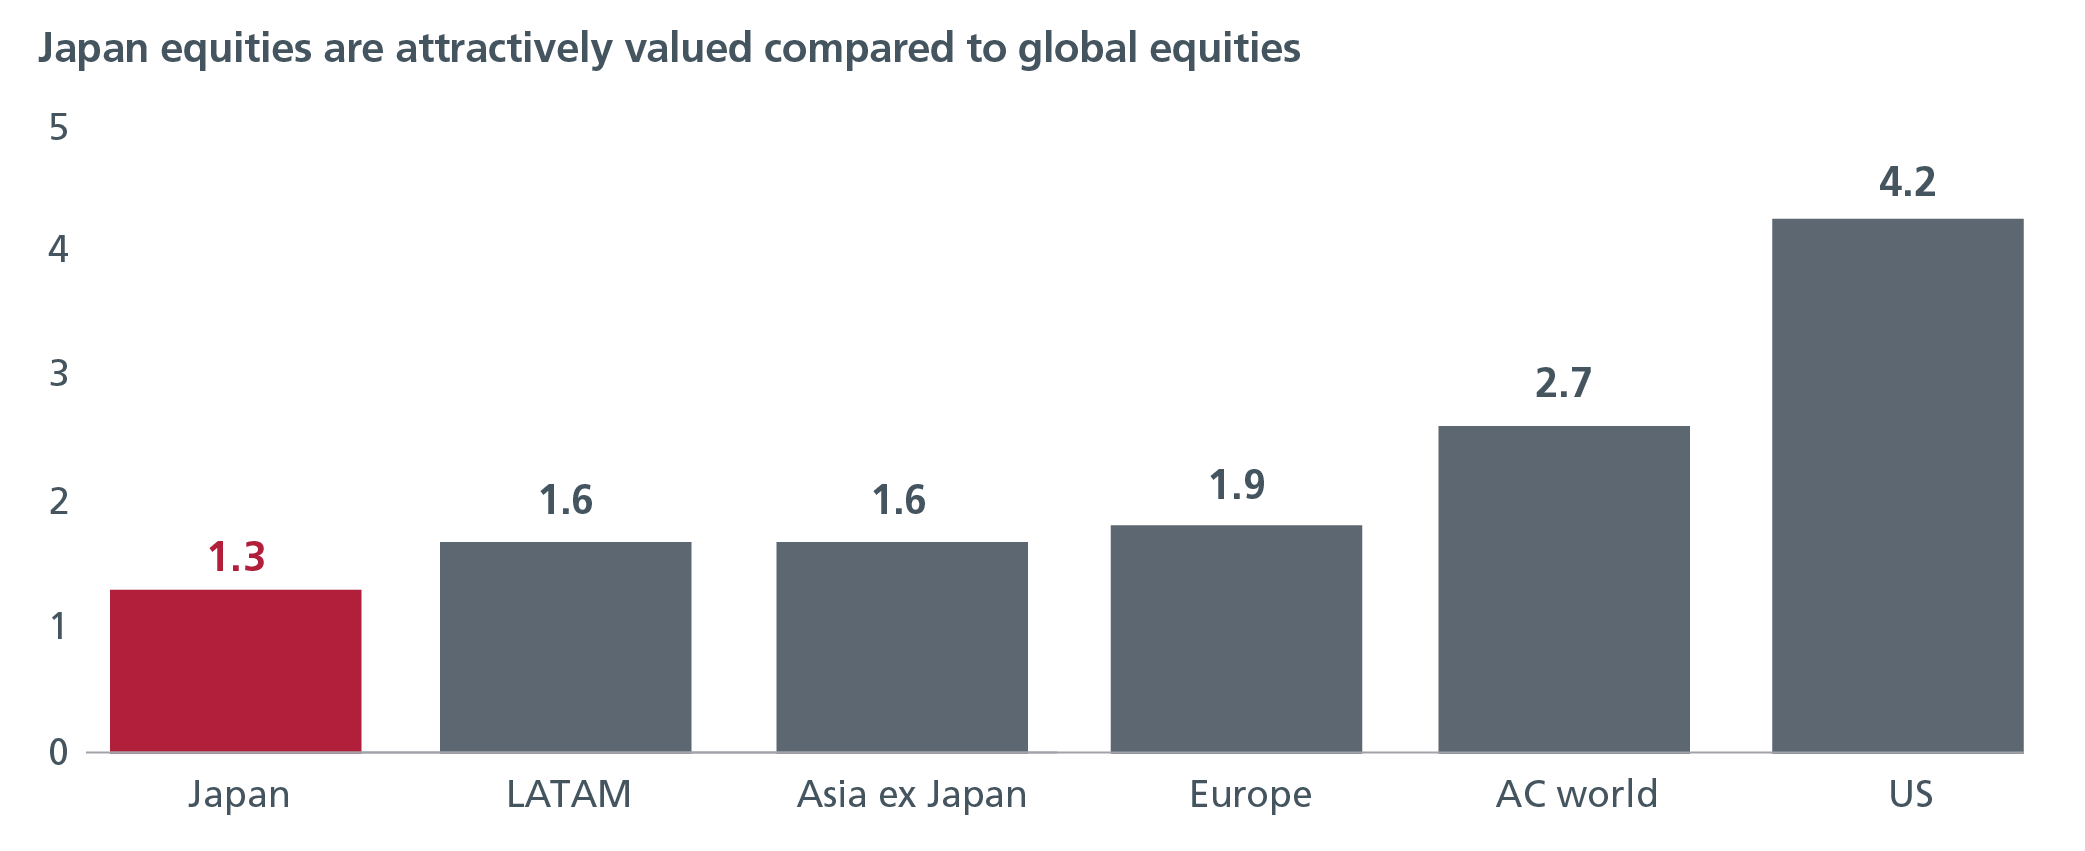 A graph showing the value of Japan equities compared to global equities